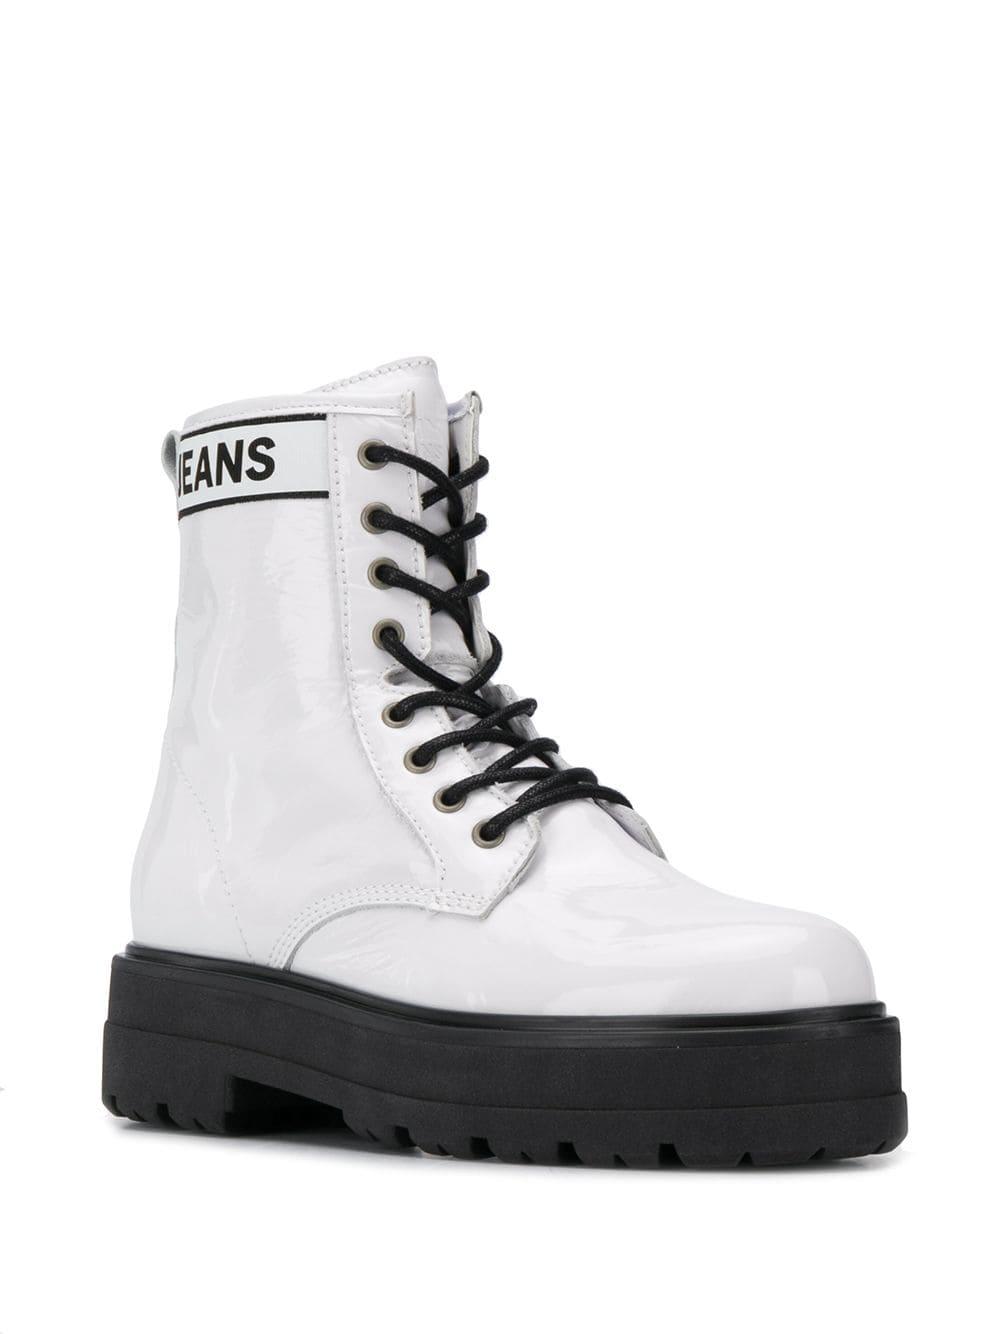 tommy hilfiger white boots